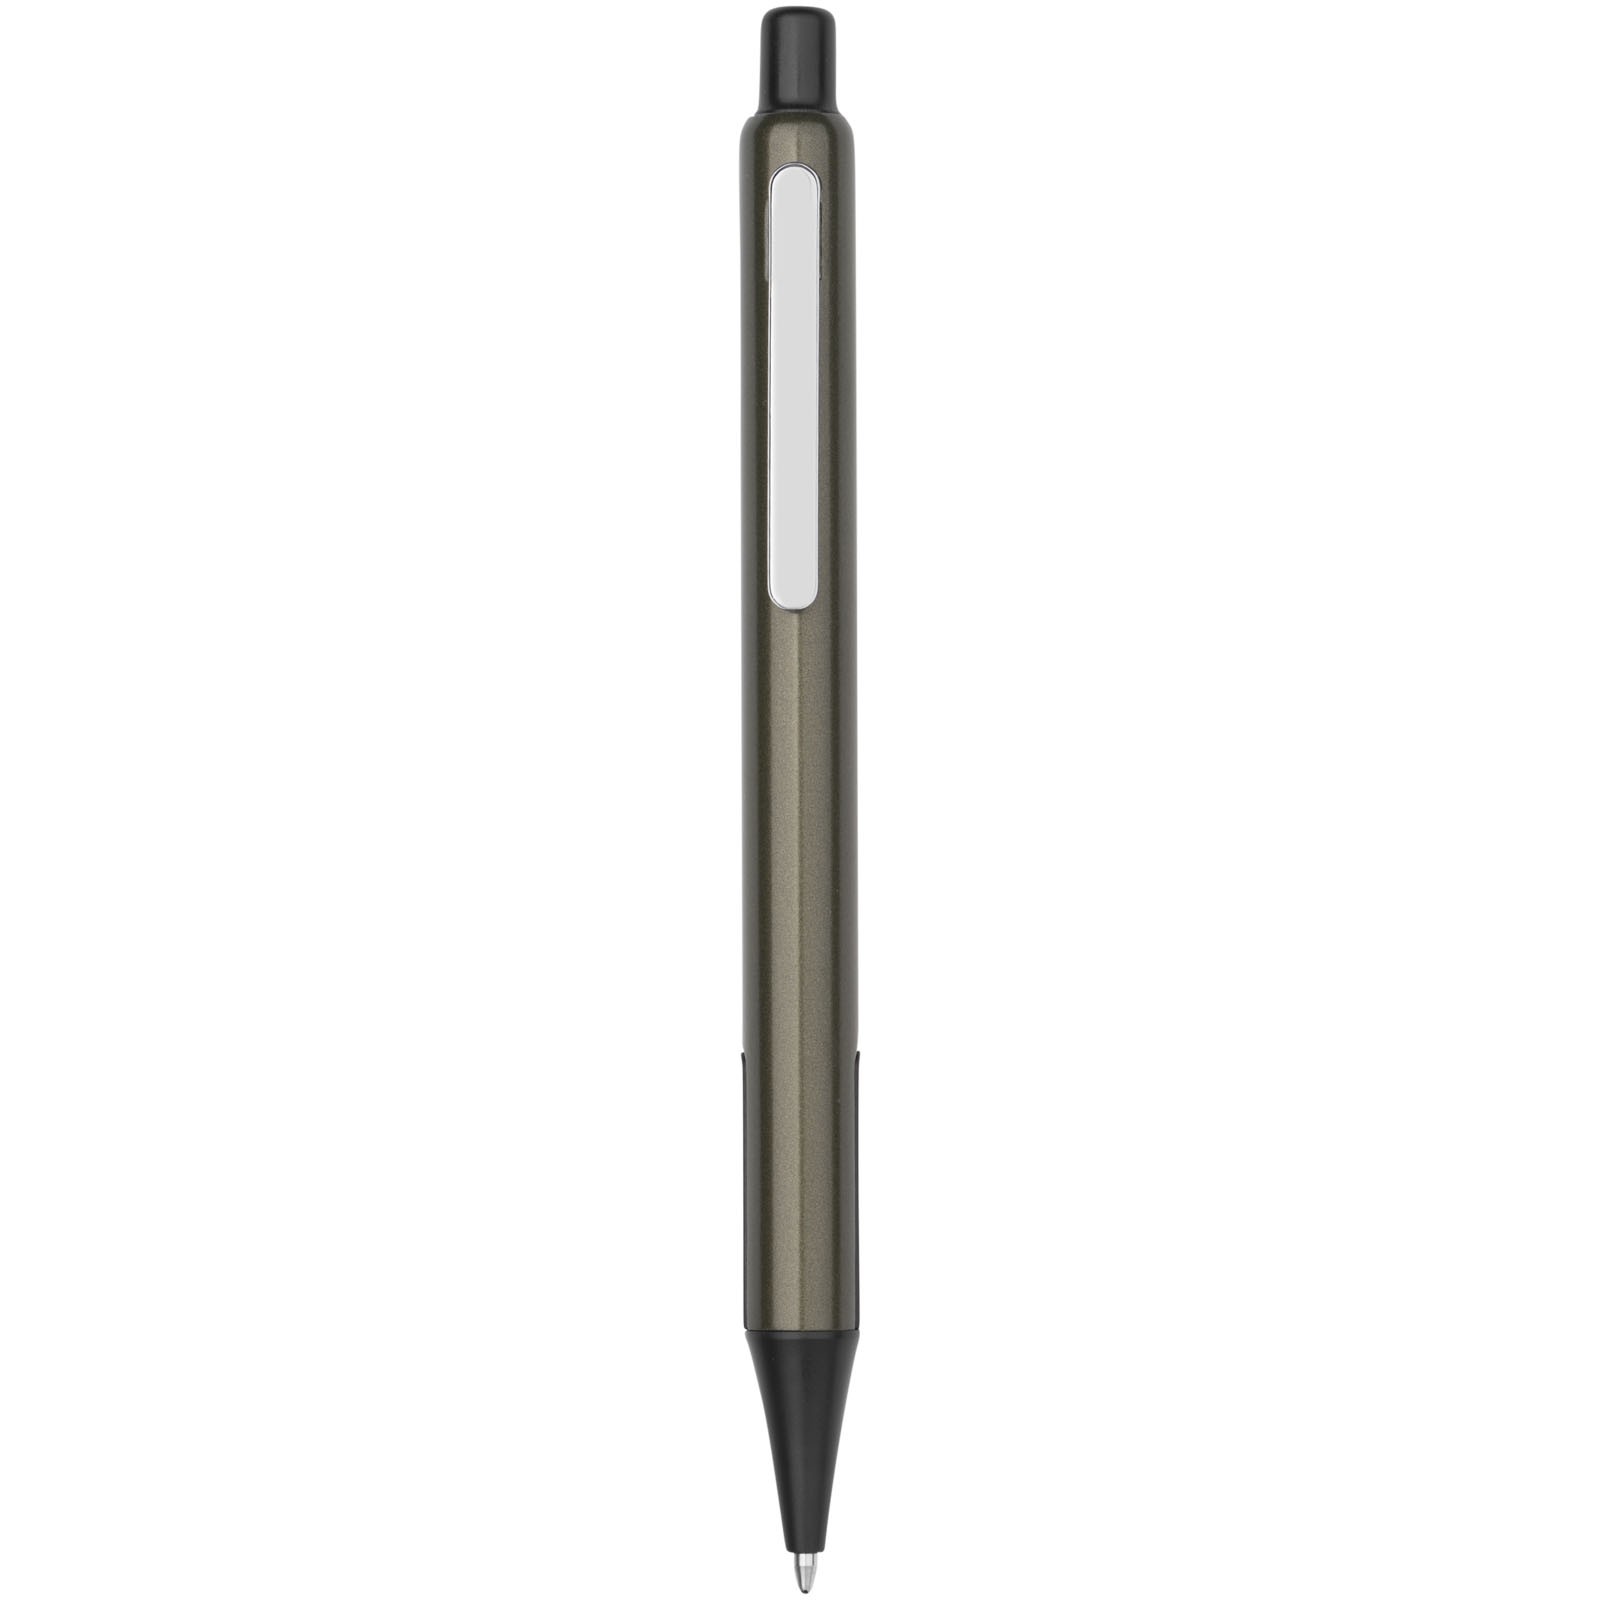 Milas ballpoint pen with rubber grips - Olive